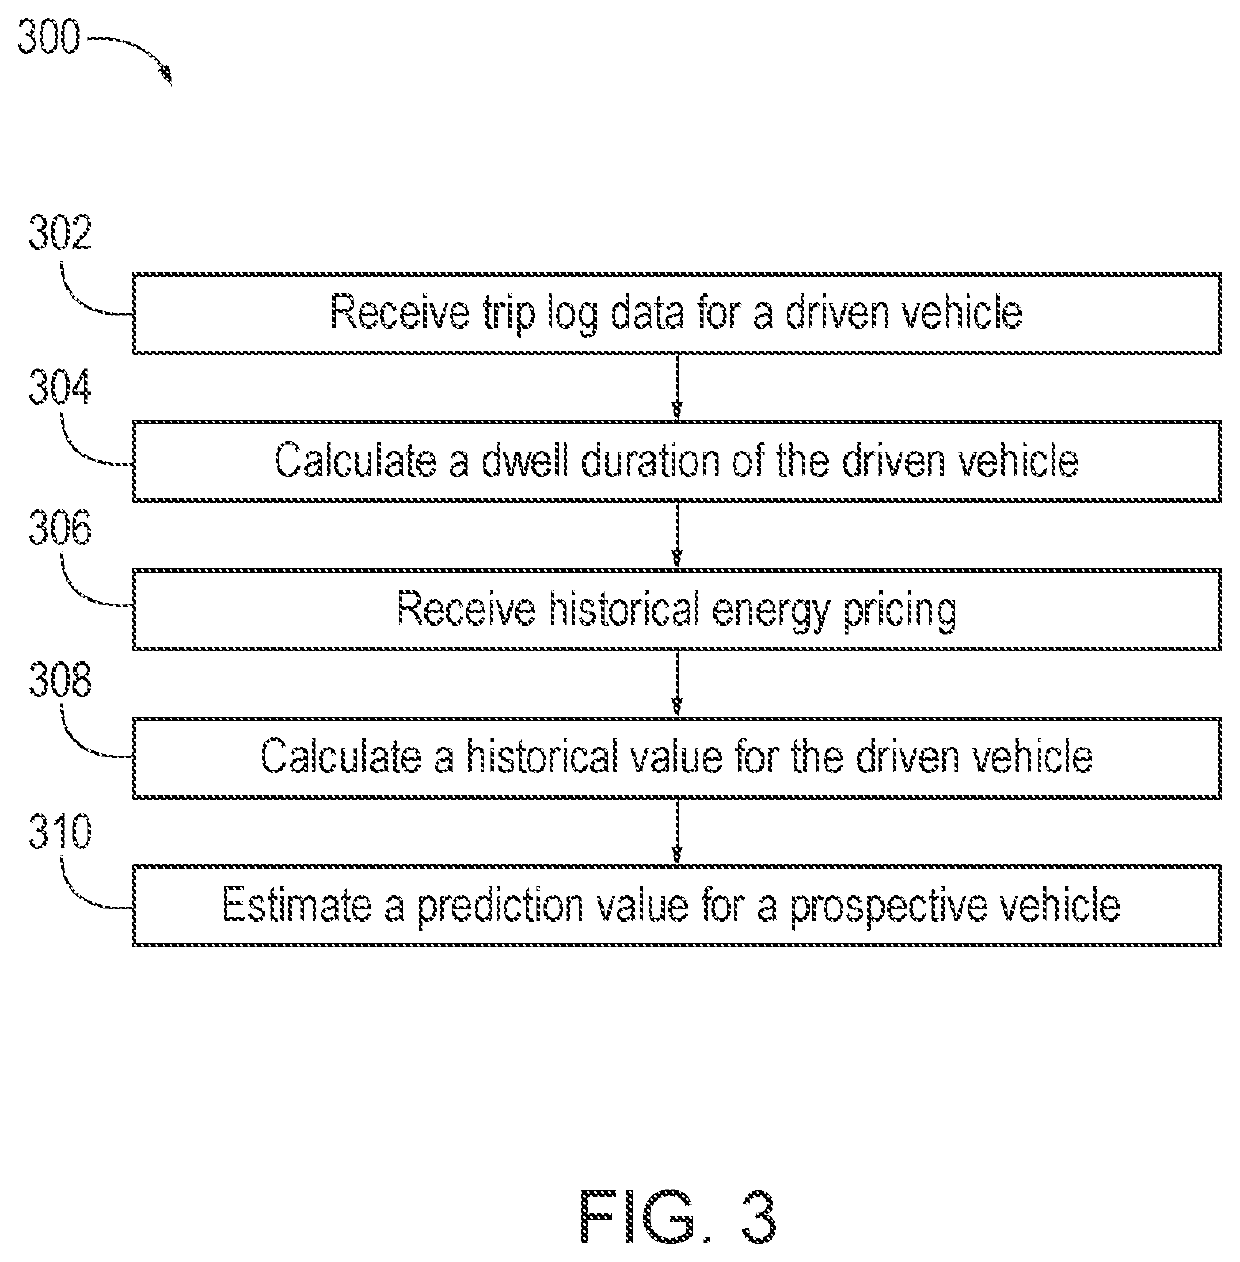 Systems and methods for estimating a prediction value for prospective vehicle usage